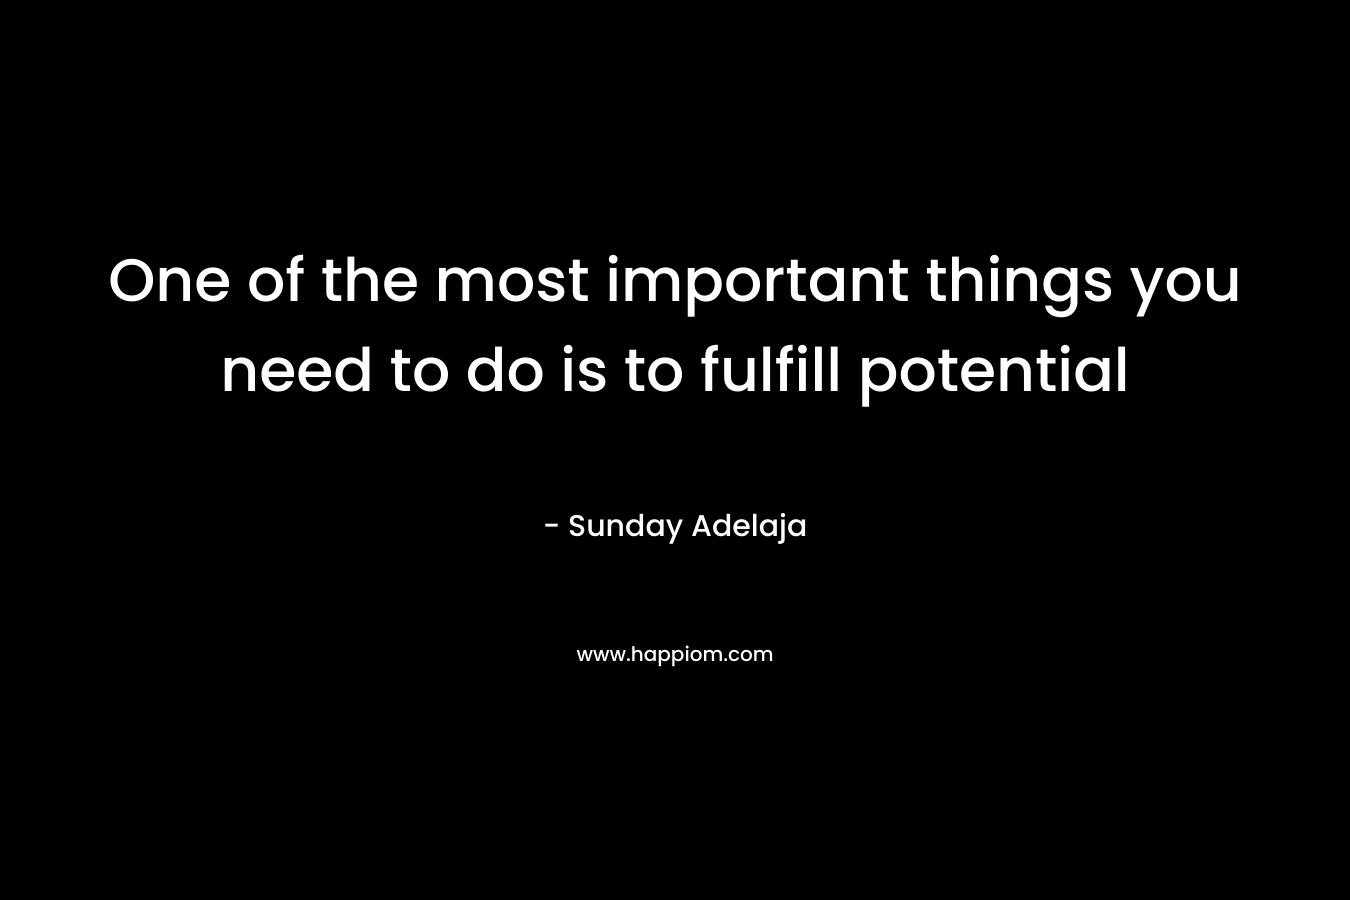 One of the most important things you need to do is to fulfill potential